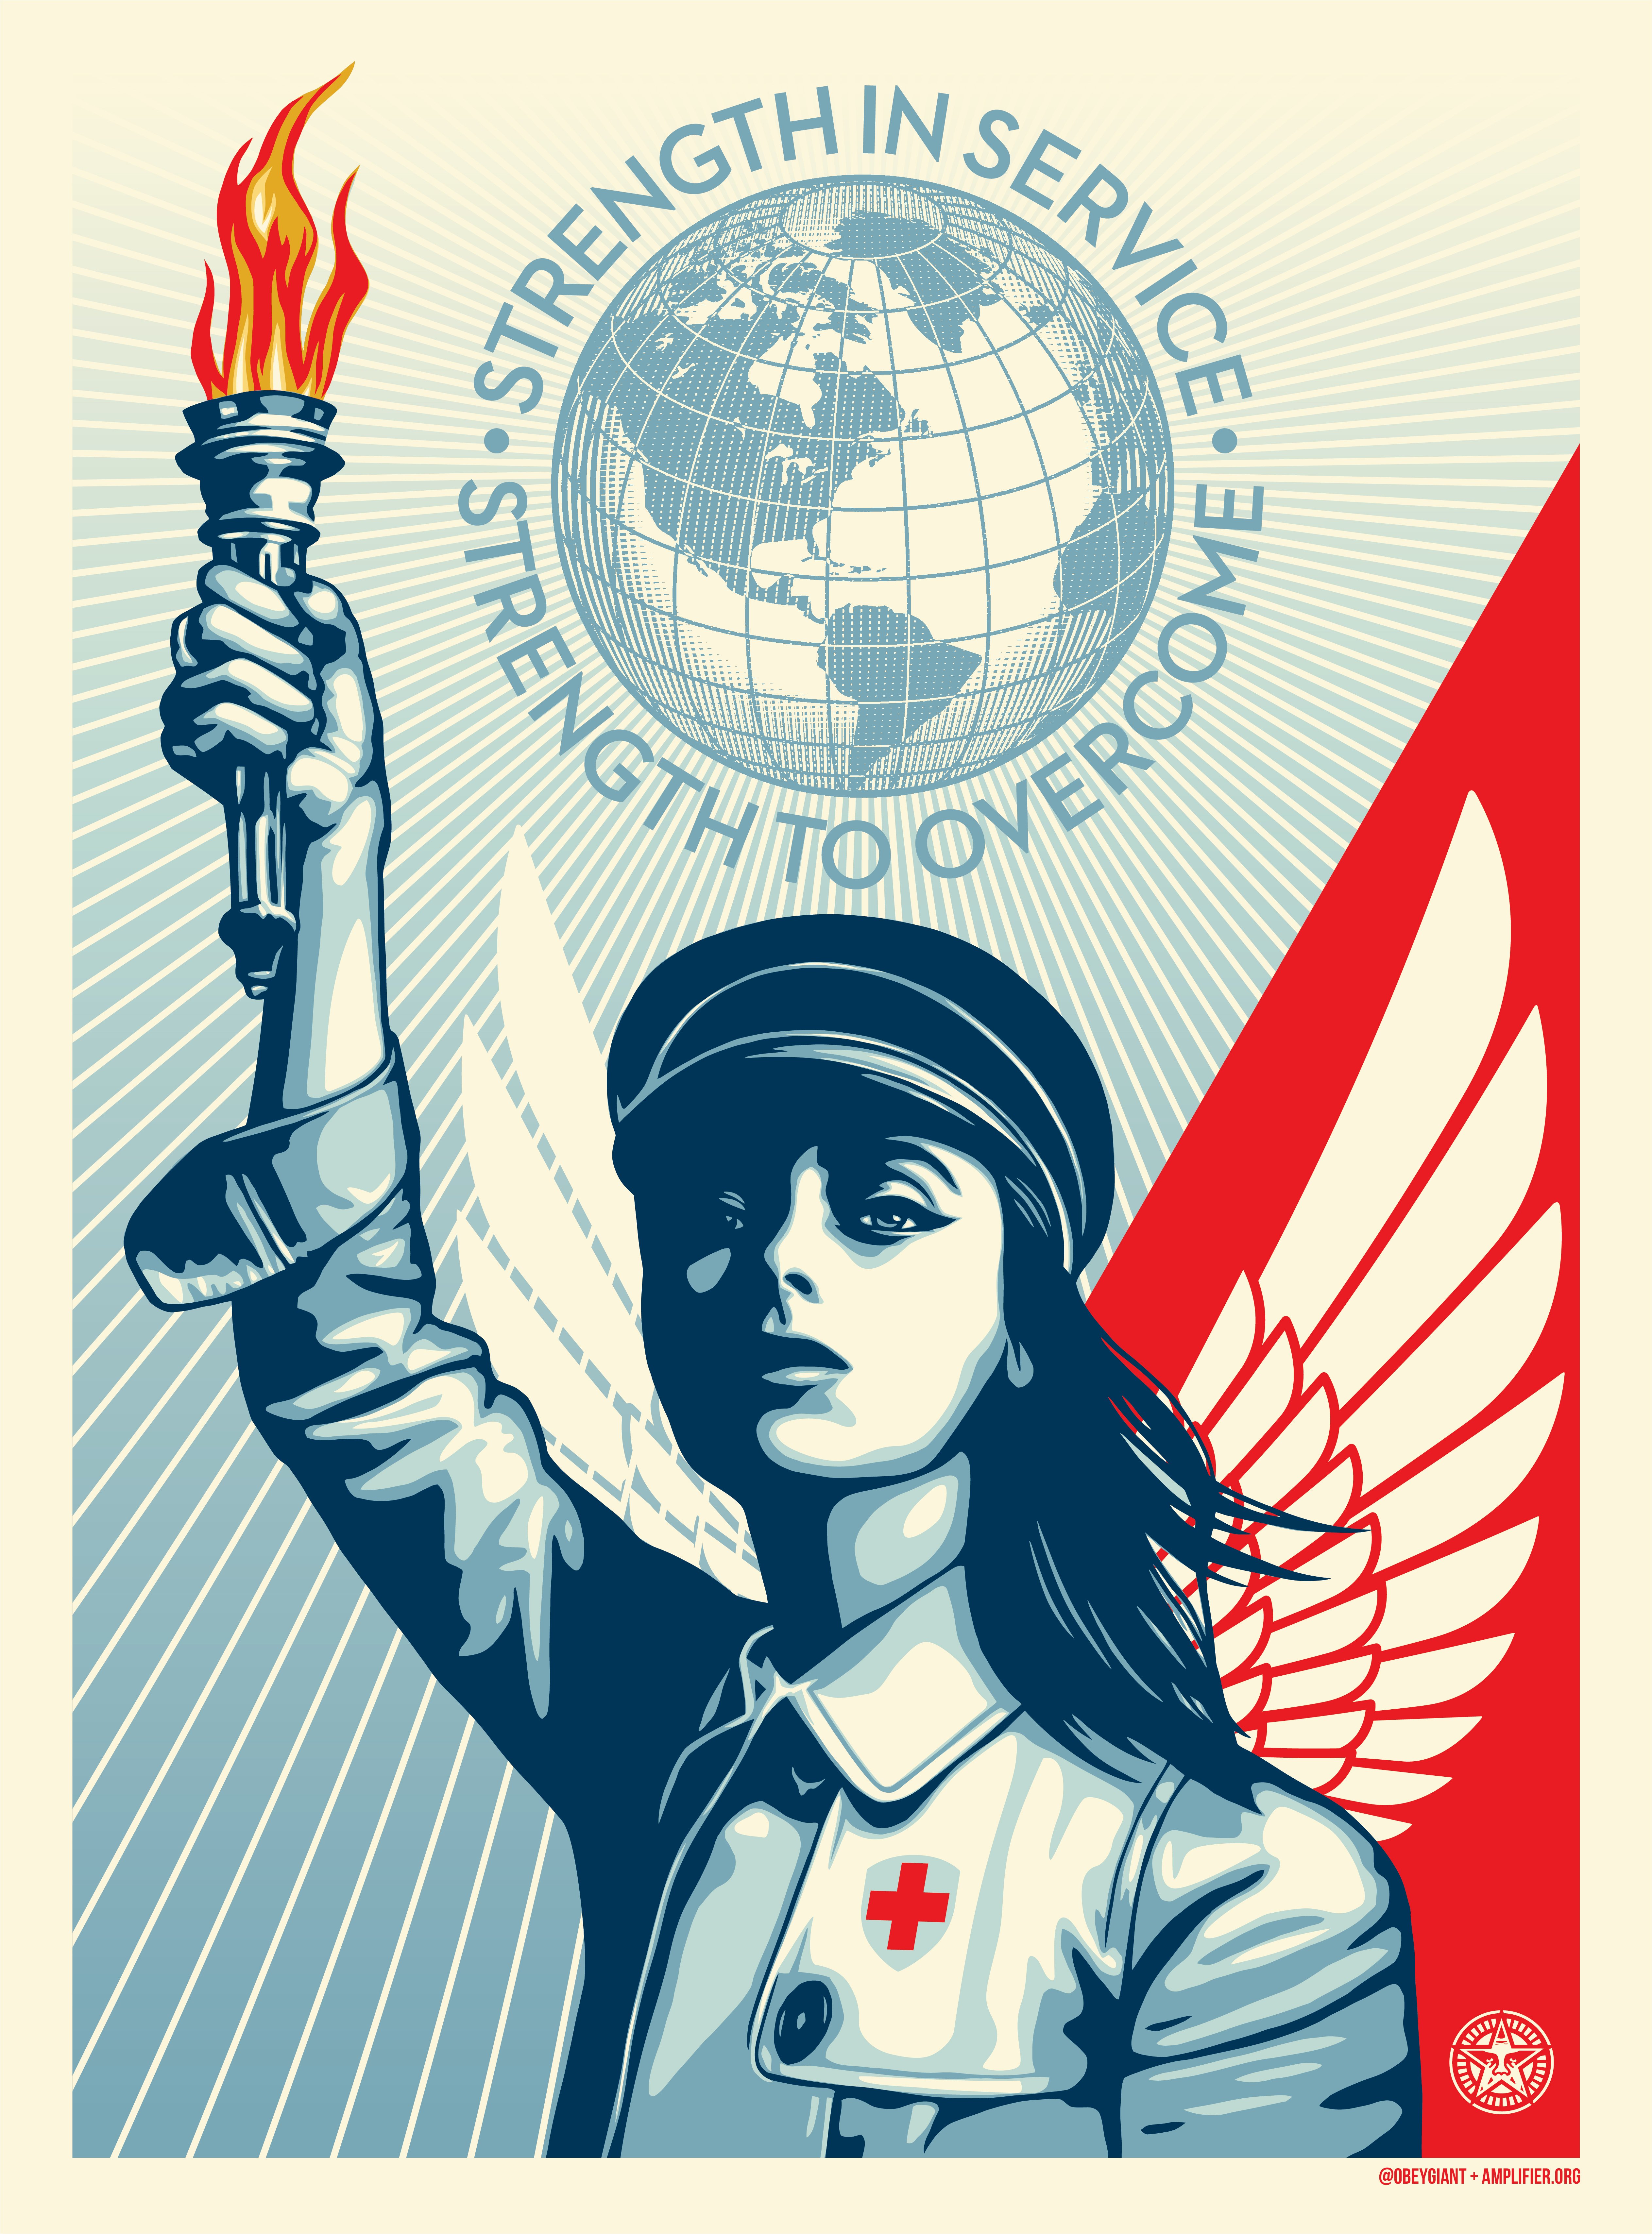 SHEPARD FAIREY Obey Giant Sticker 4 X 5 in CORPORATE VIOLENCE from poster print 